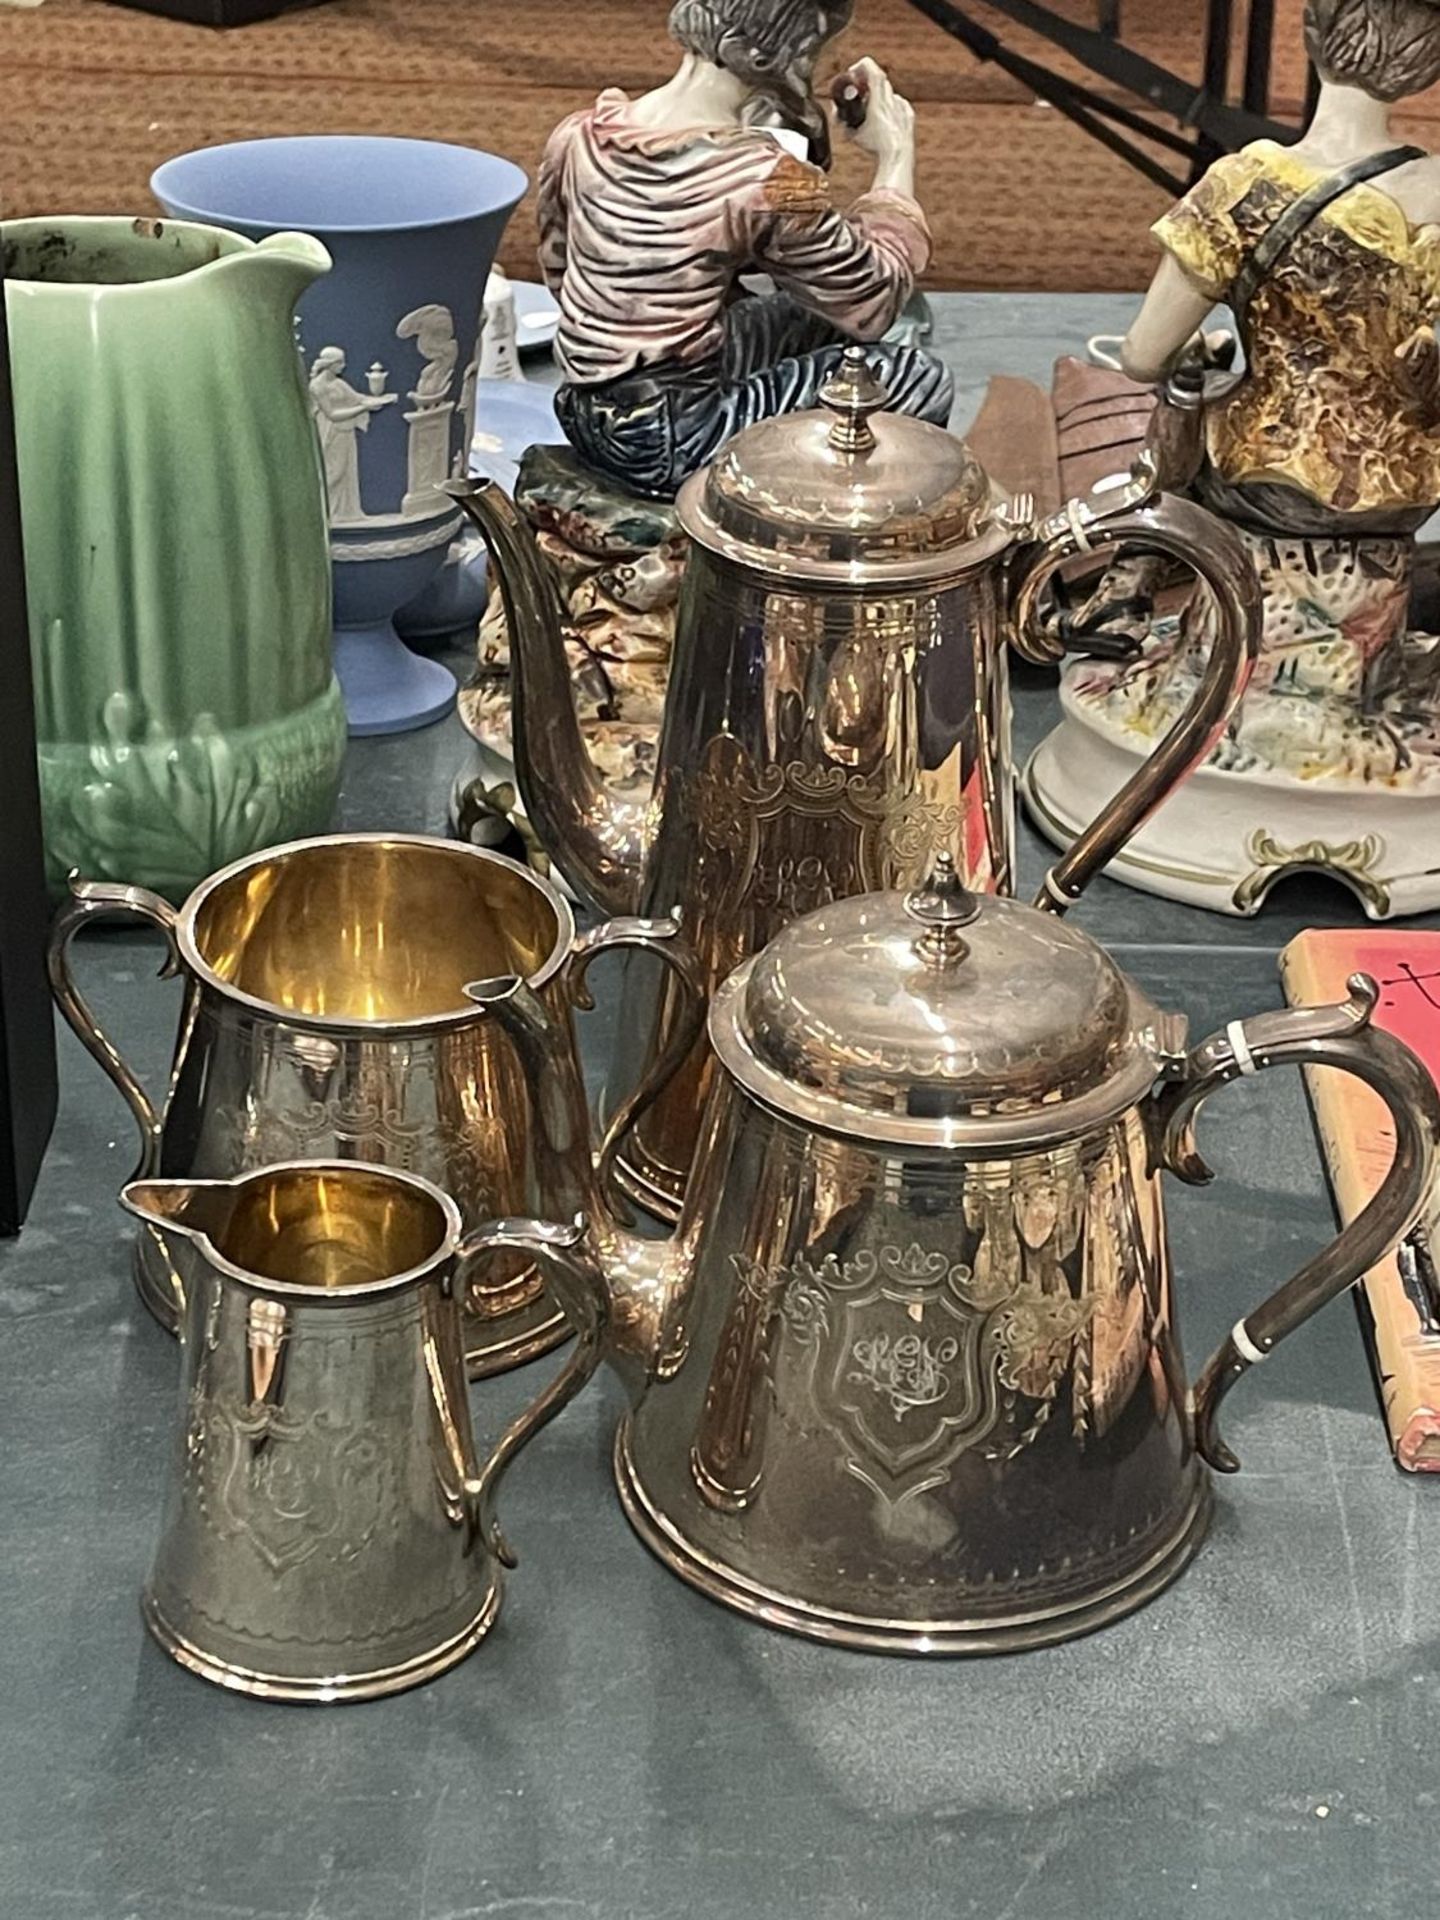 FOUR PIECES OF ELKINGTON SILVER PLATE, PATTERN NO. 16635, TO INCLUDE A COFFEE POT, TEAPOT, CREAM JUG